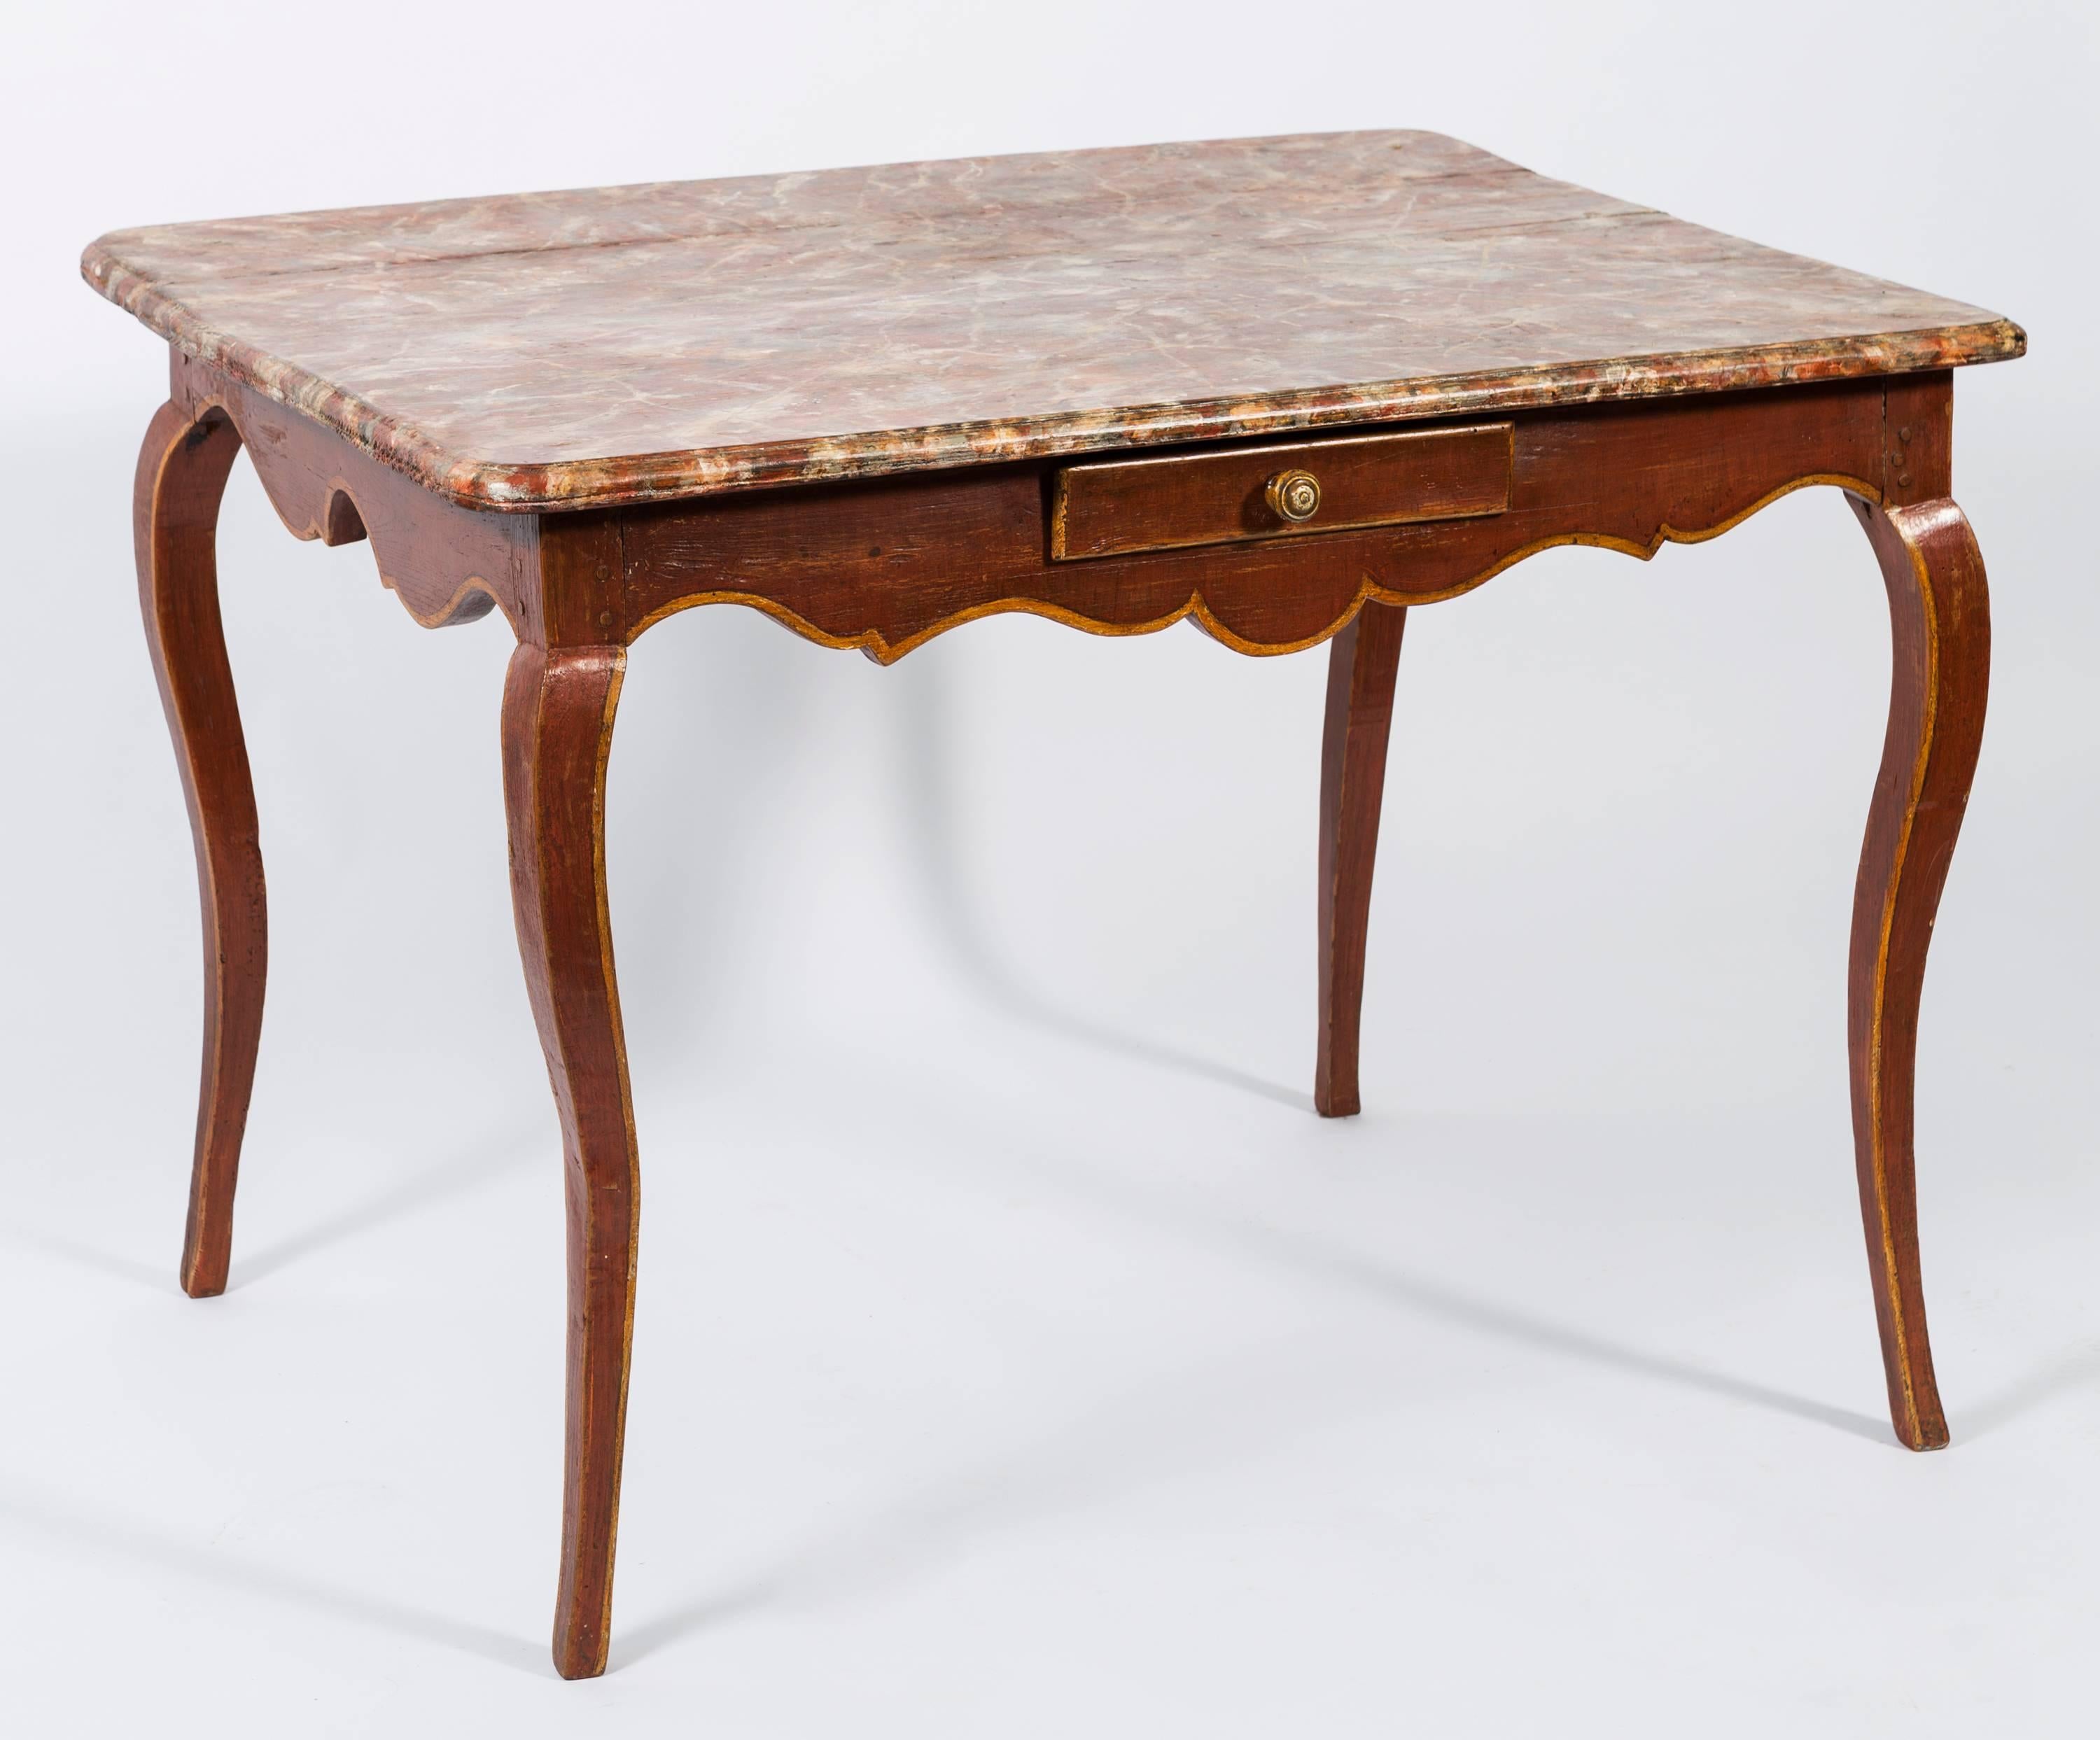 Hand-Painted 19th Century French Painted Wood Table with Faux Marble Top For Sale